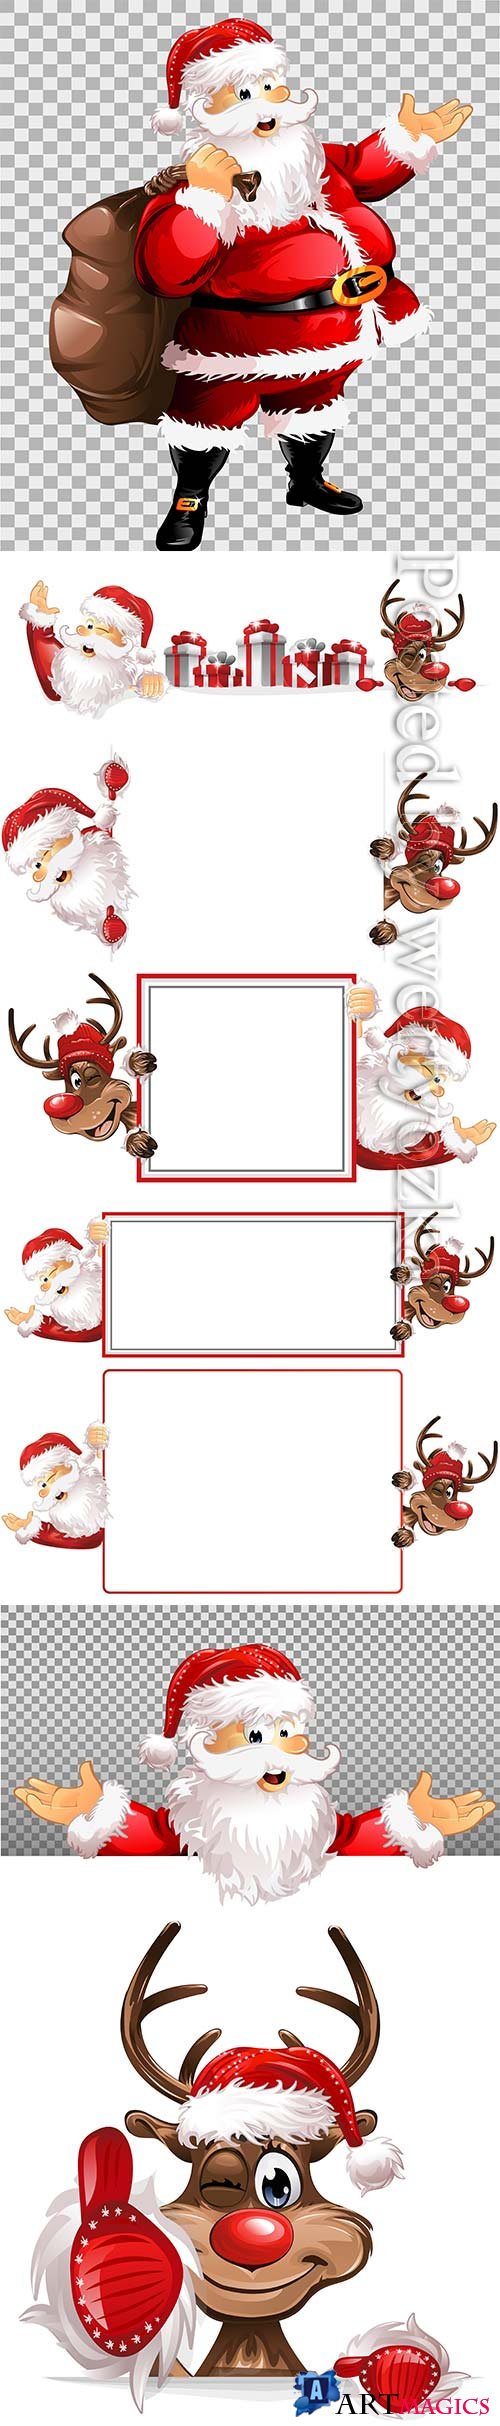 Santa Claus and deer on a vector background